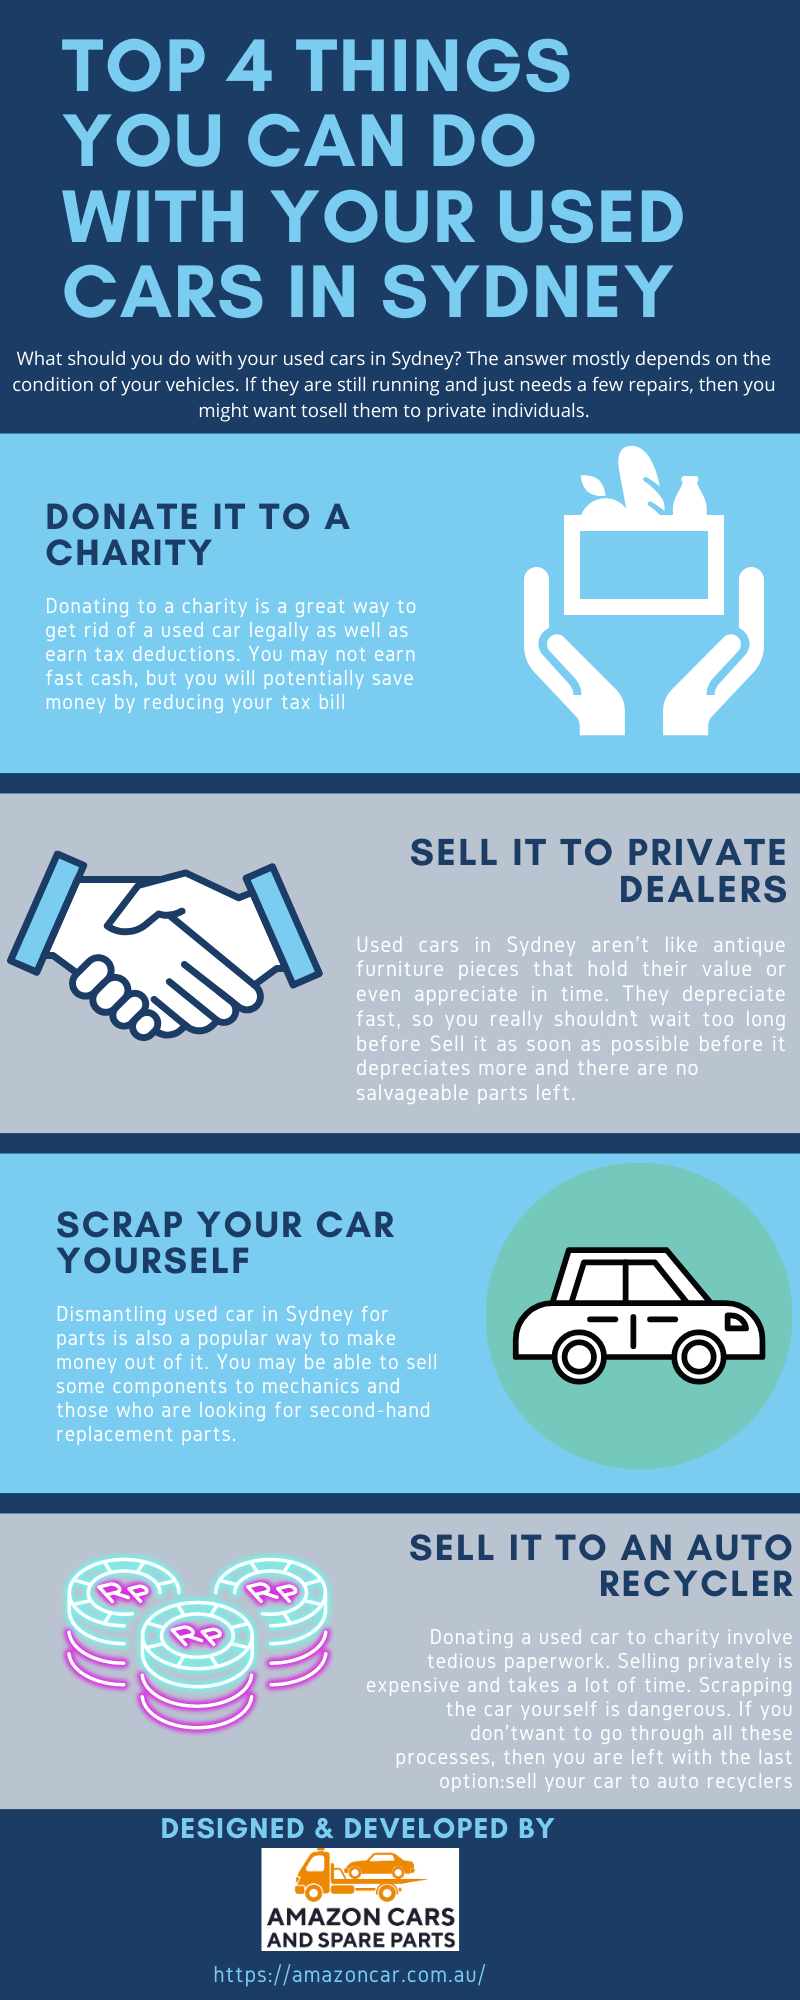 Top 4 Things You Can Do with Your Used Cars in Sydney.png  by amazoncars